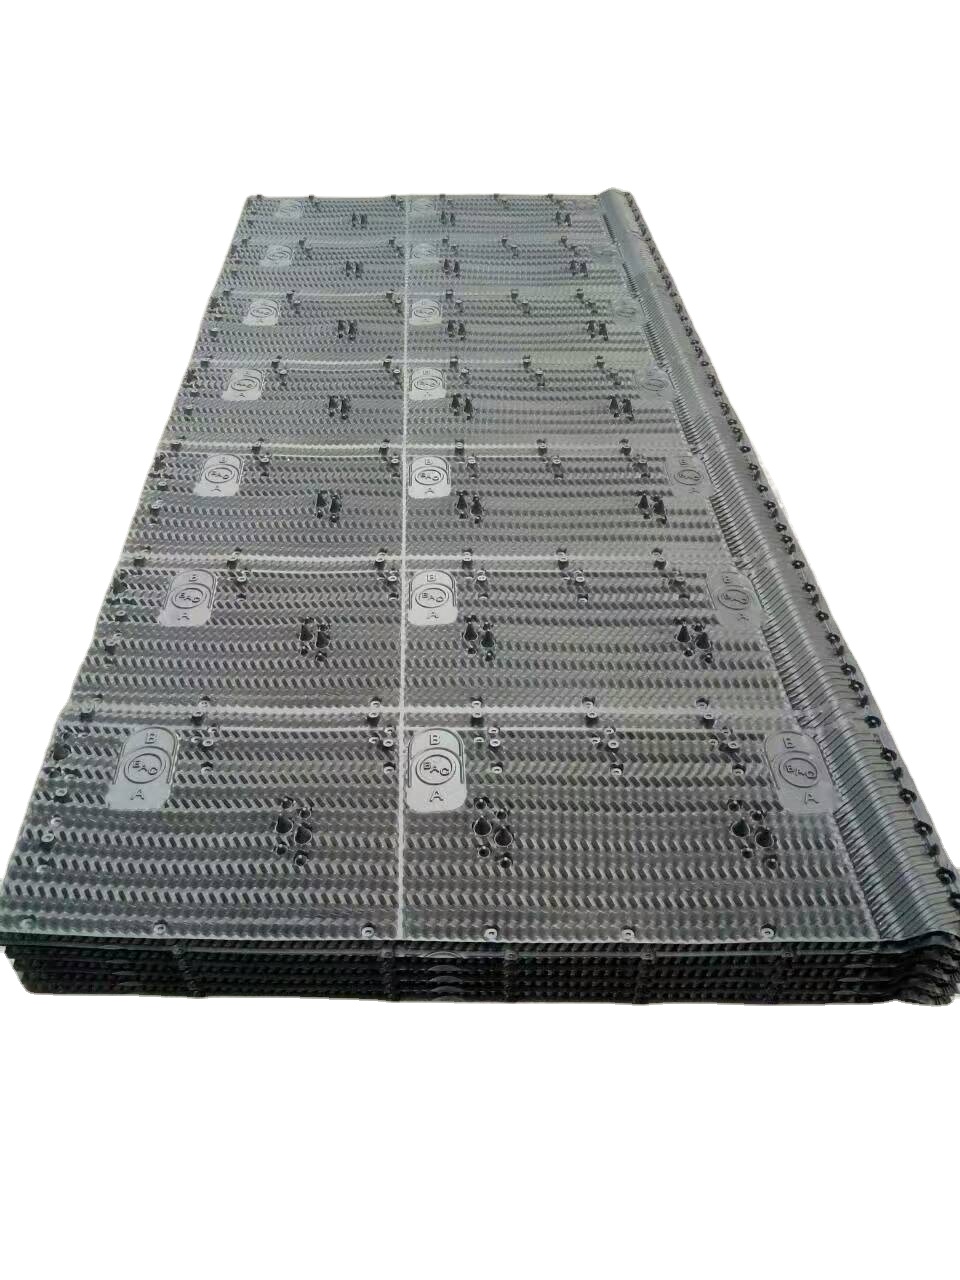 BAC Type cooling tower fill